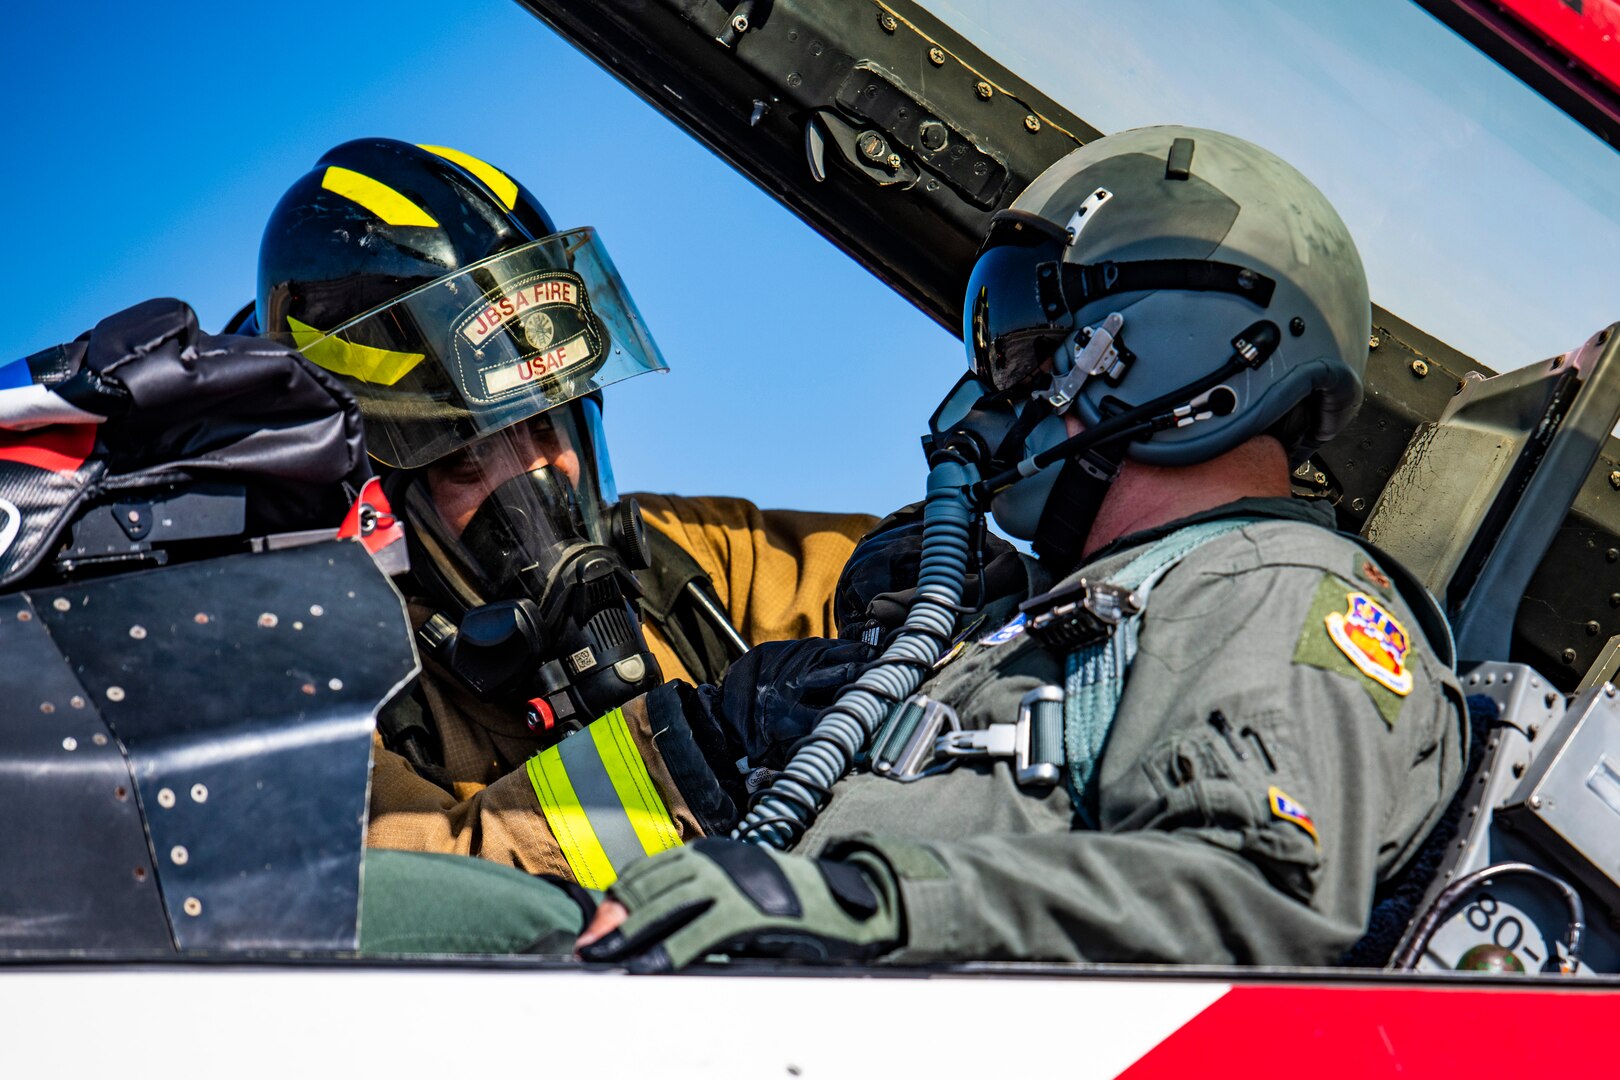 Michael Hillard, 902nd Civil Engineer Squadron firefighter, prepares Maj. Benjamin Wong, 149th Fighter Wing training officer, for extraction during an emergency response egress exercise for an F-16 Fighting Falcon at Joint Base San Antonio-Lackland, Texas, Aug. 19, 2022.